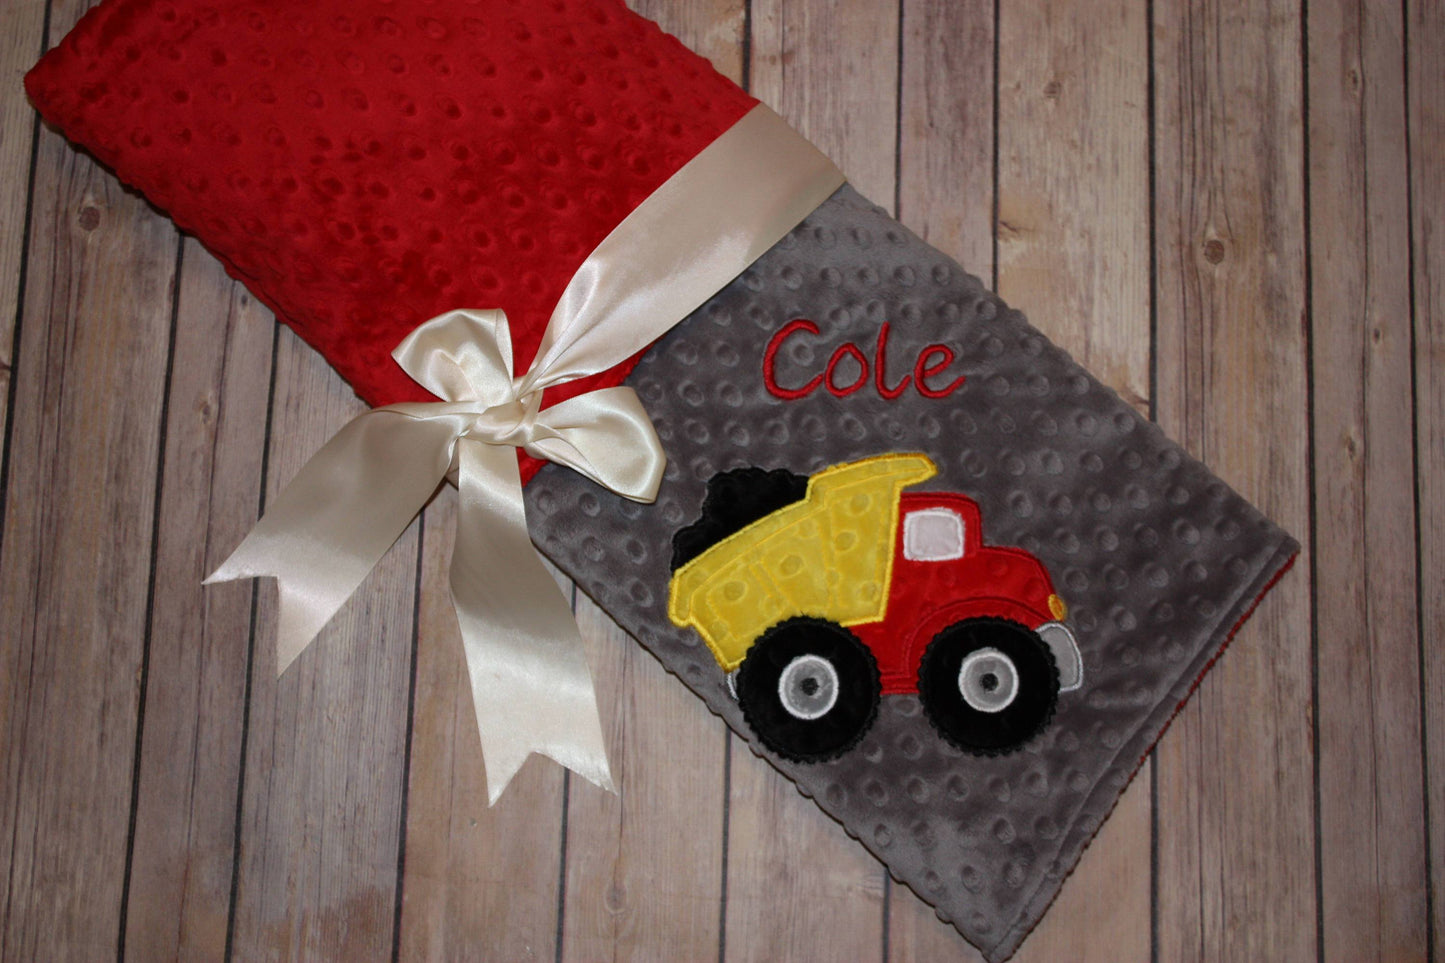 Dump Truck Nap Set - Personalized Minky Blanket and Pillowcase with embroidered Dump Truck - Travel or Standard Size